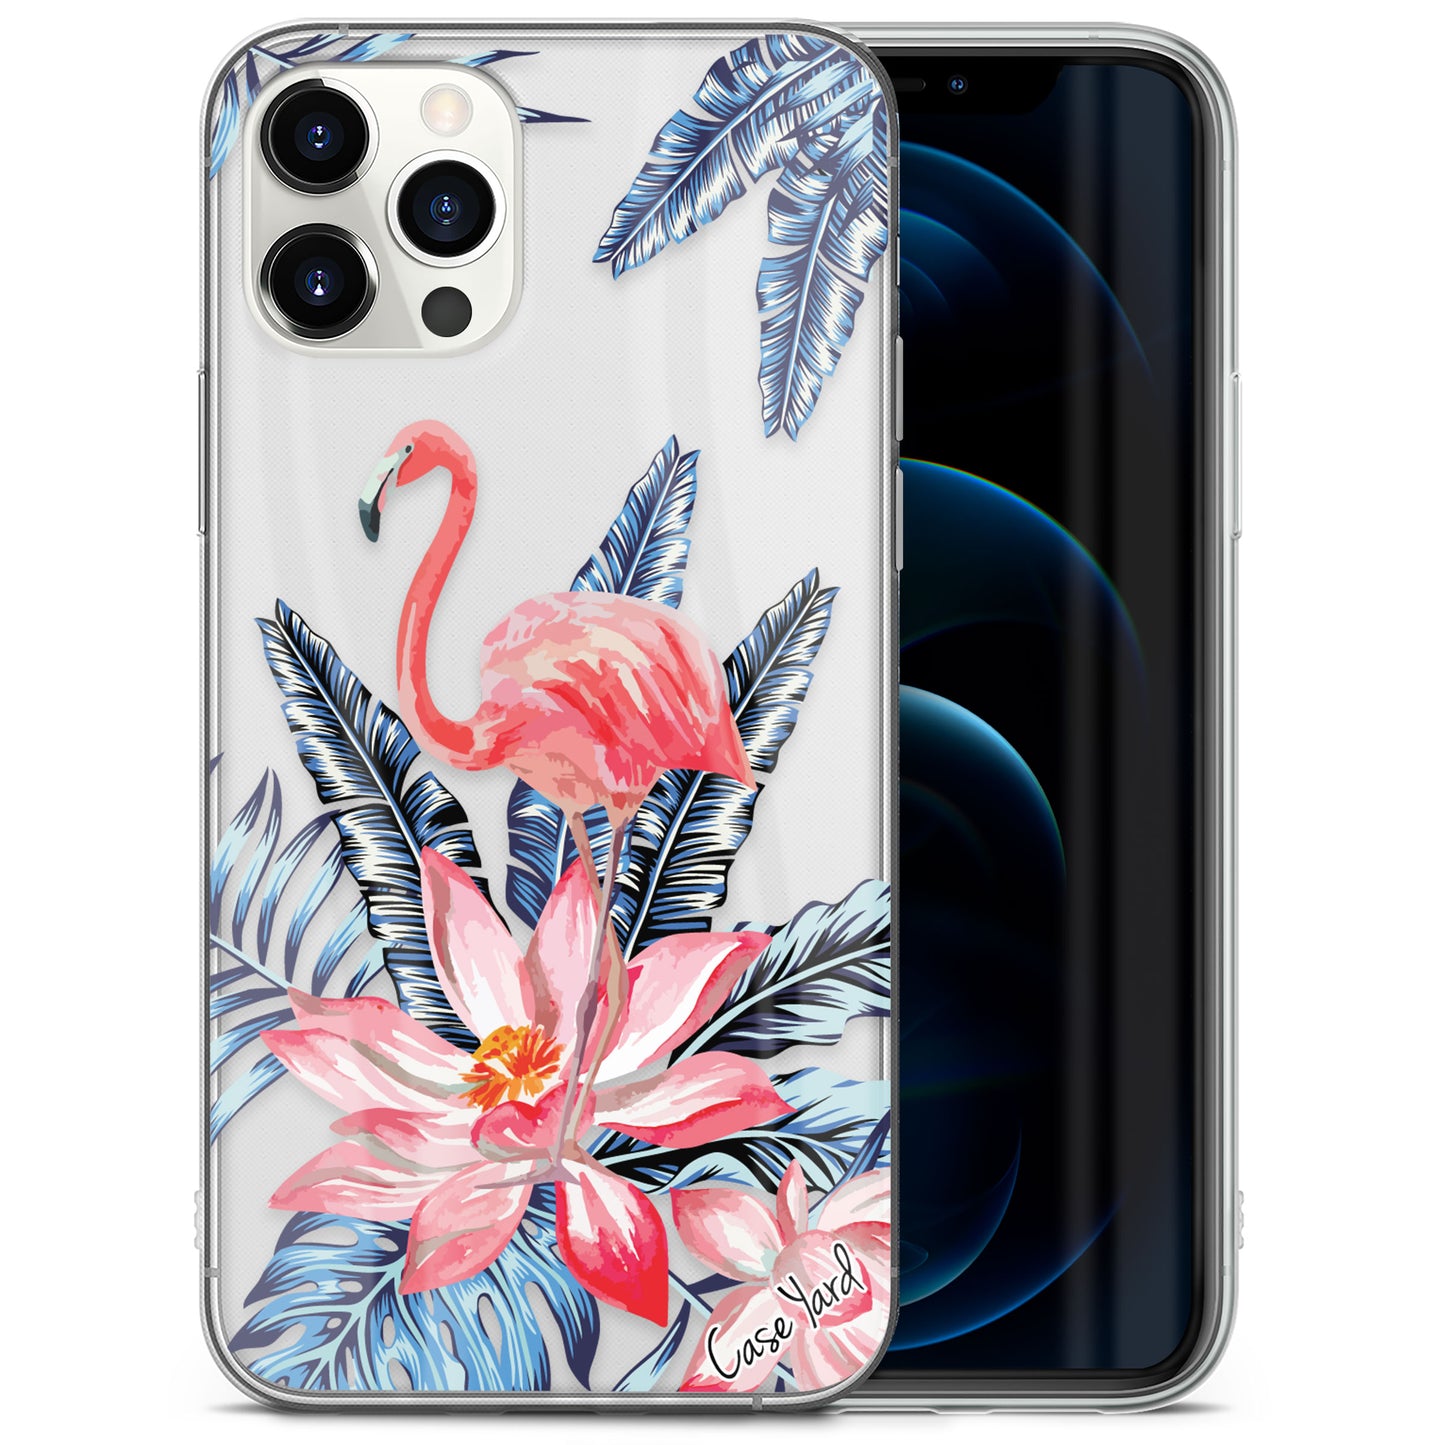 TPU Clear case with (Flamingo ) Design for iPhone & Samsung Phones